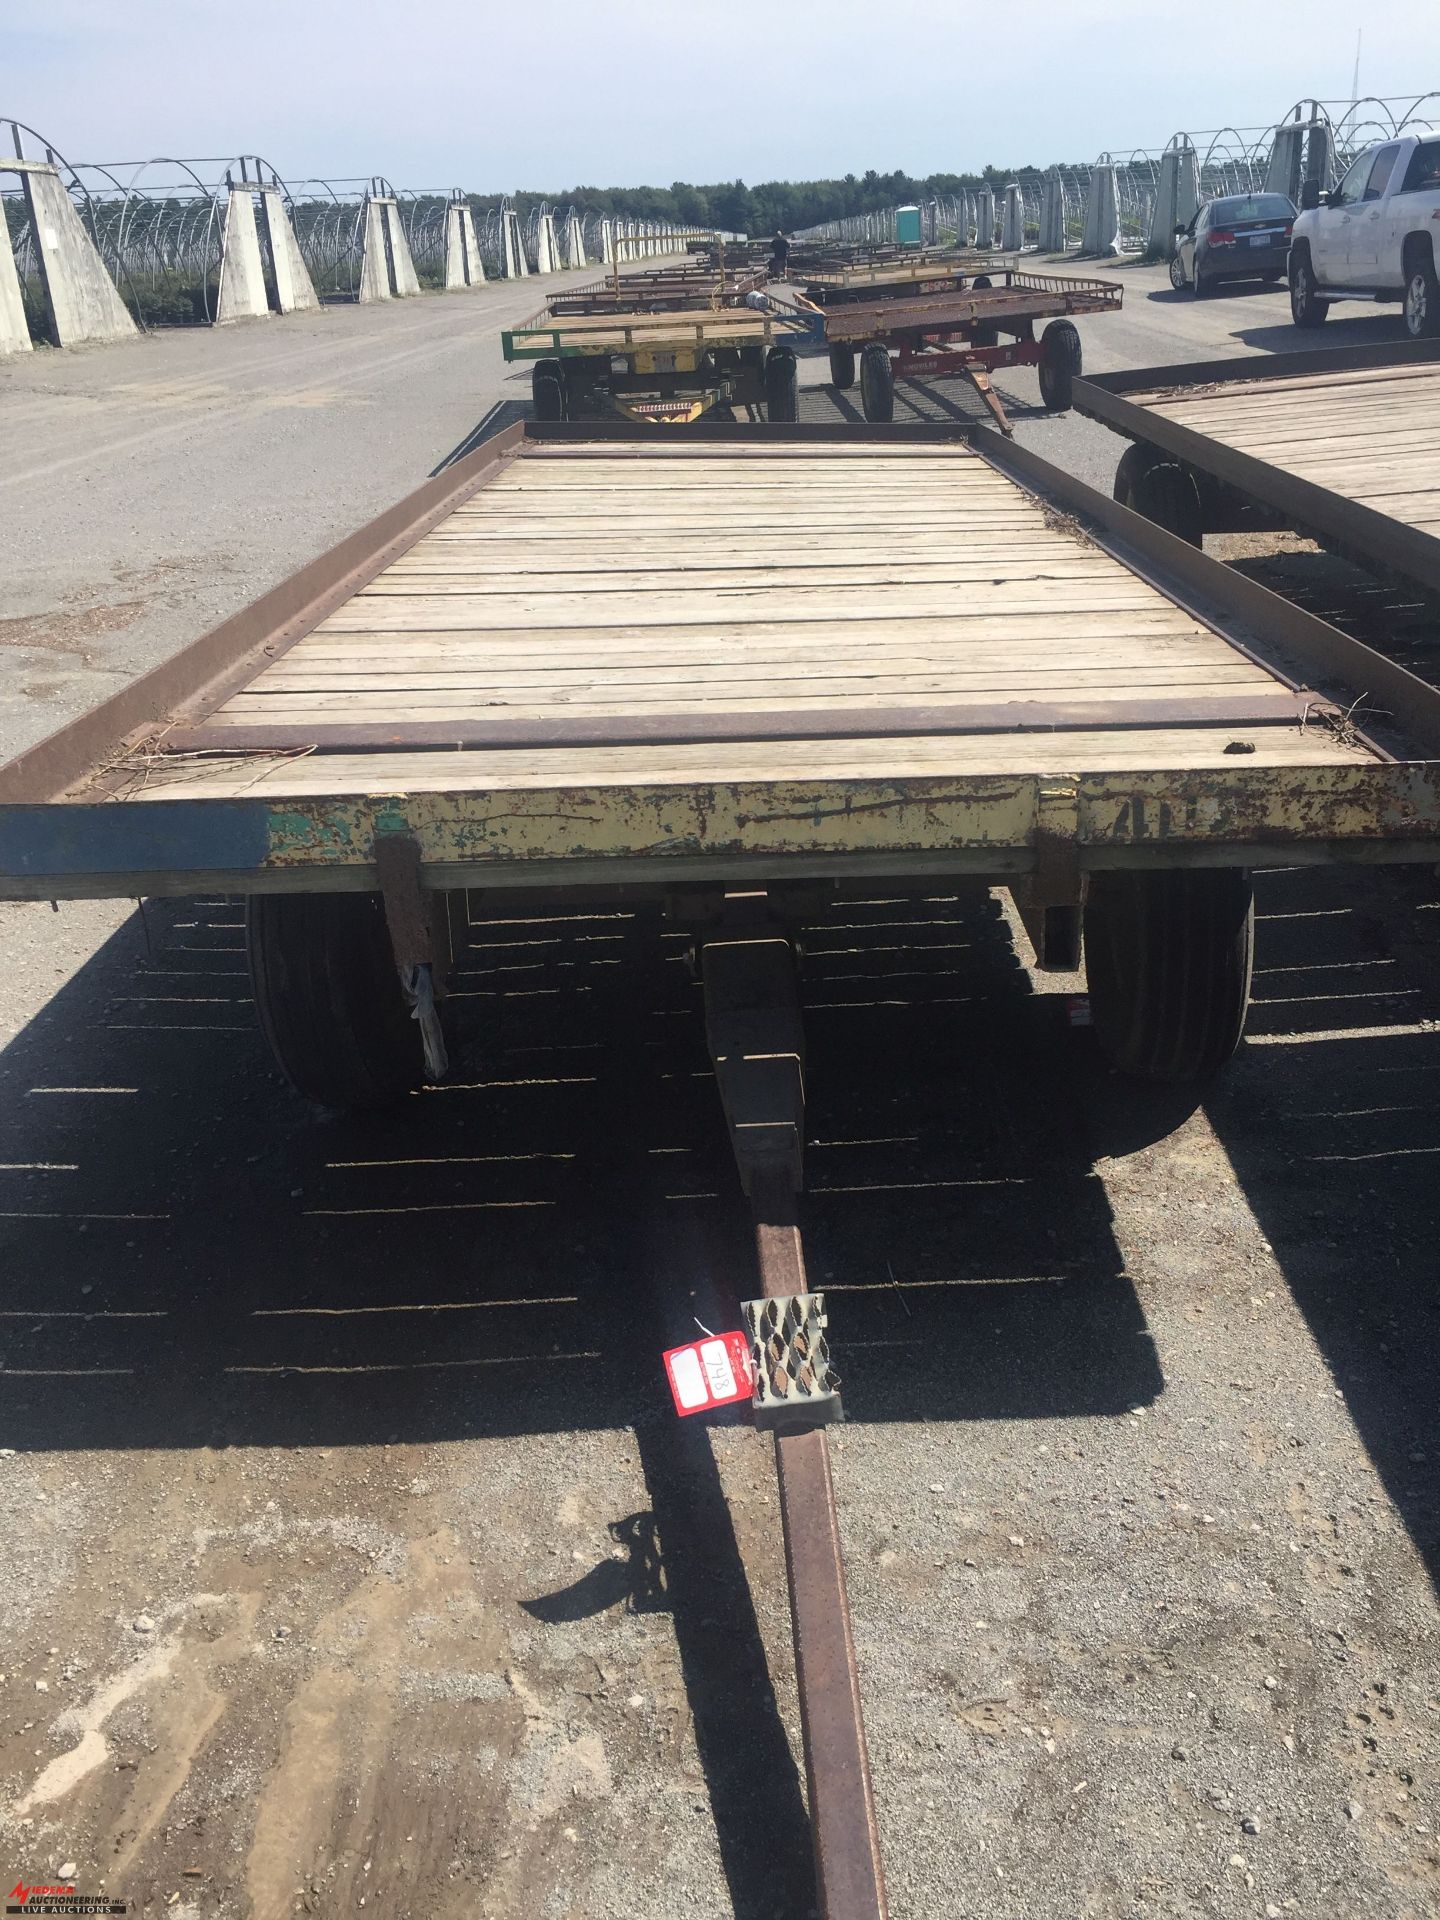 KNOWLES FLATBED WAGON, 7' WIDE x 20' LONG, FOR FARM USE ONLY [LOCATION: FILLMORE STREET FACILITY]